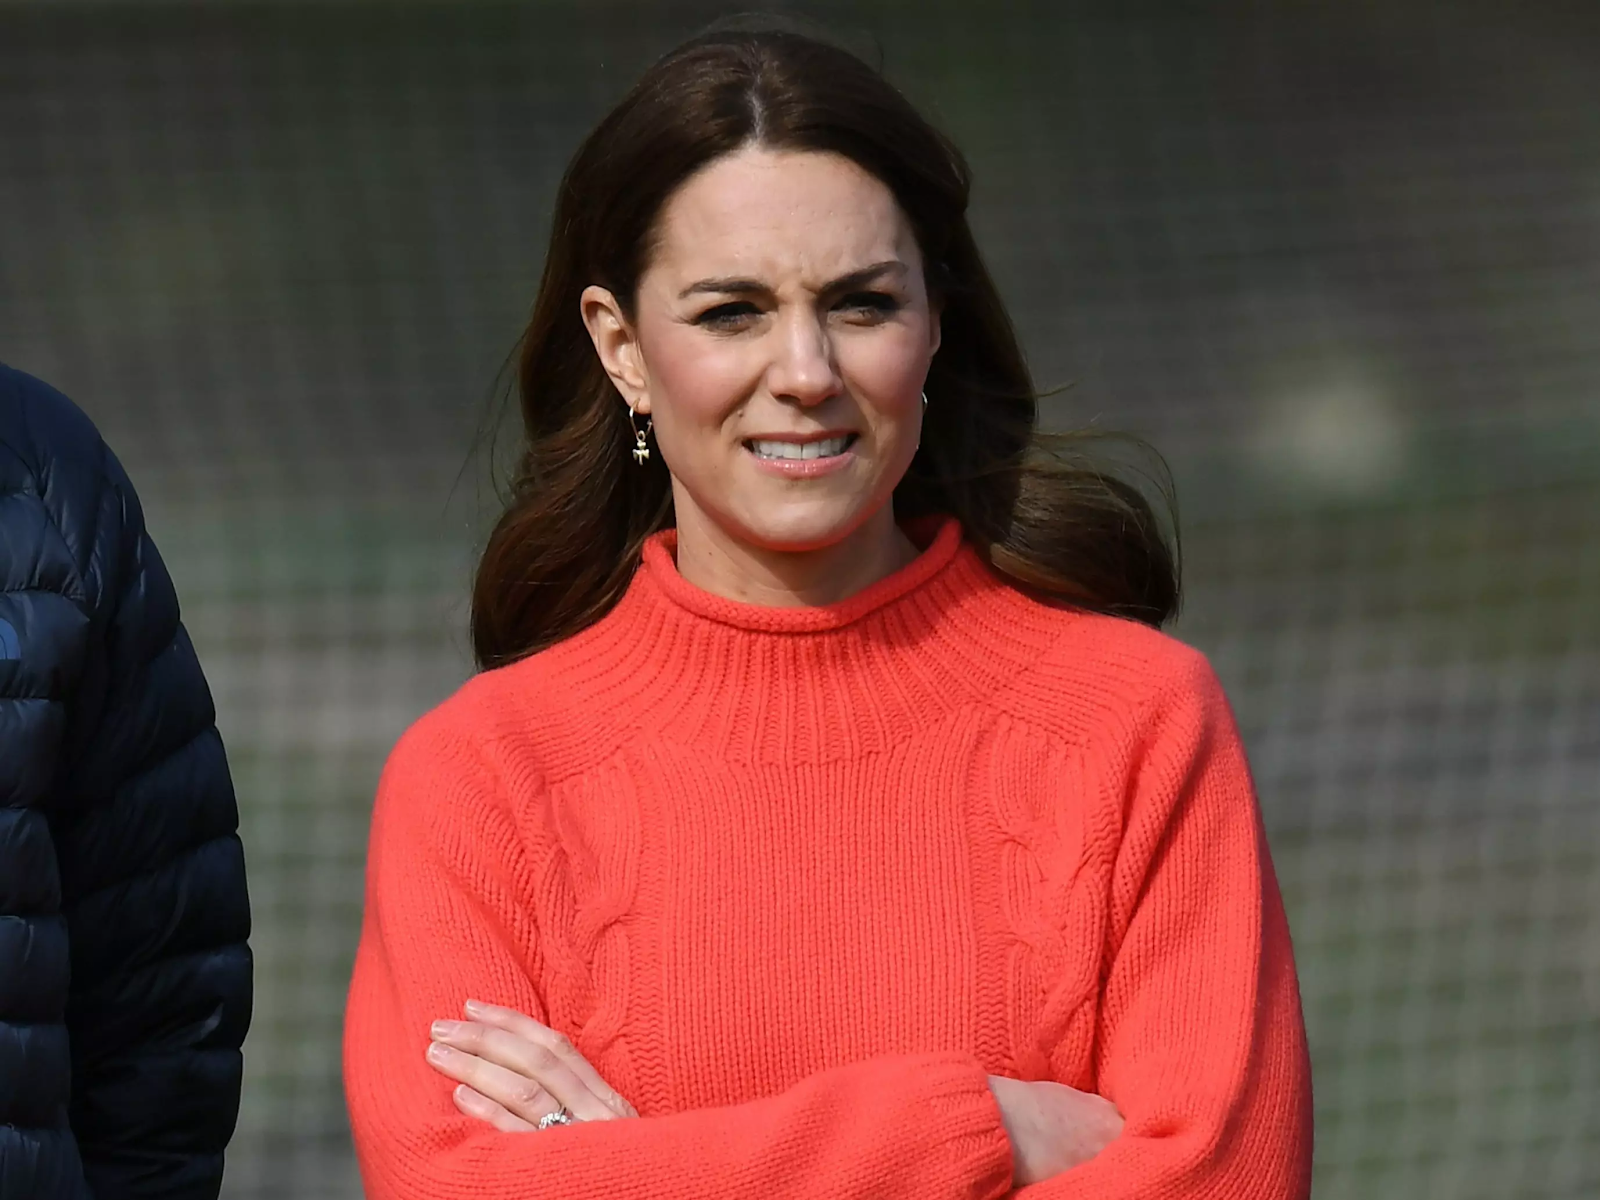 See This Detail About the Outfit That Kate Middleton Wore to a Royal Engagement, Which Sparked Rumors